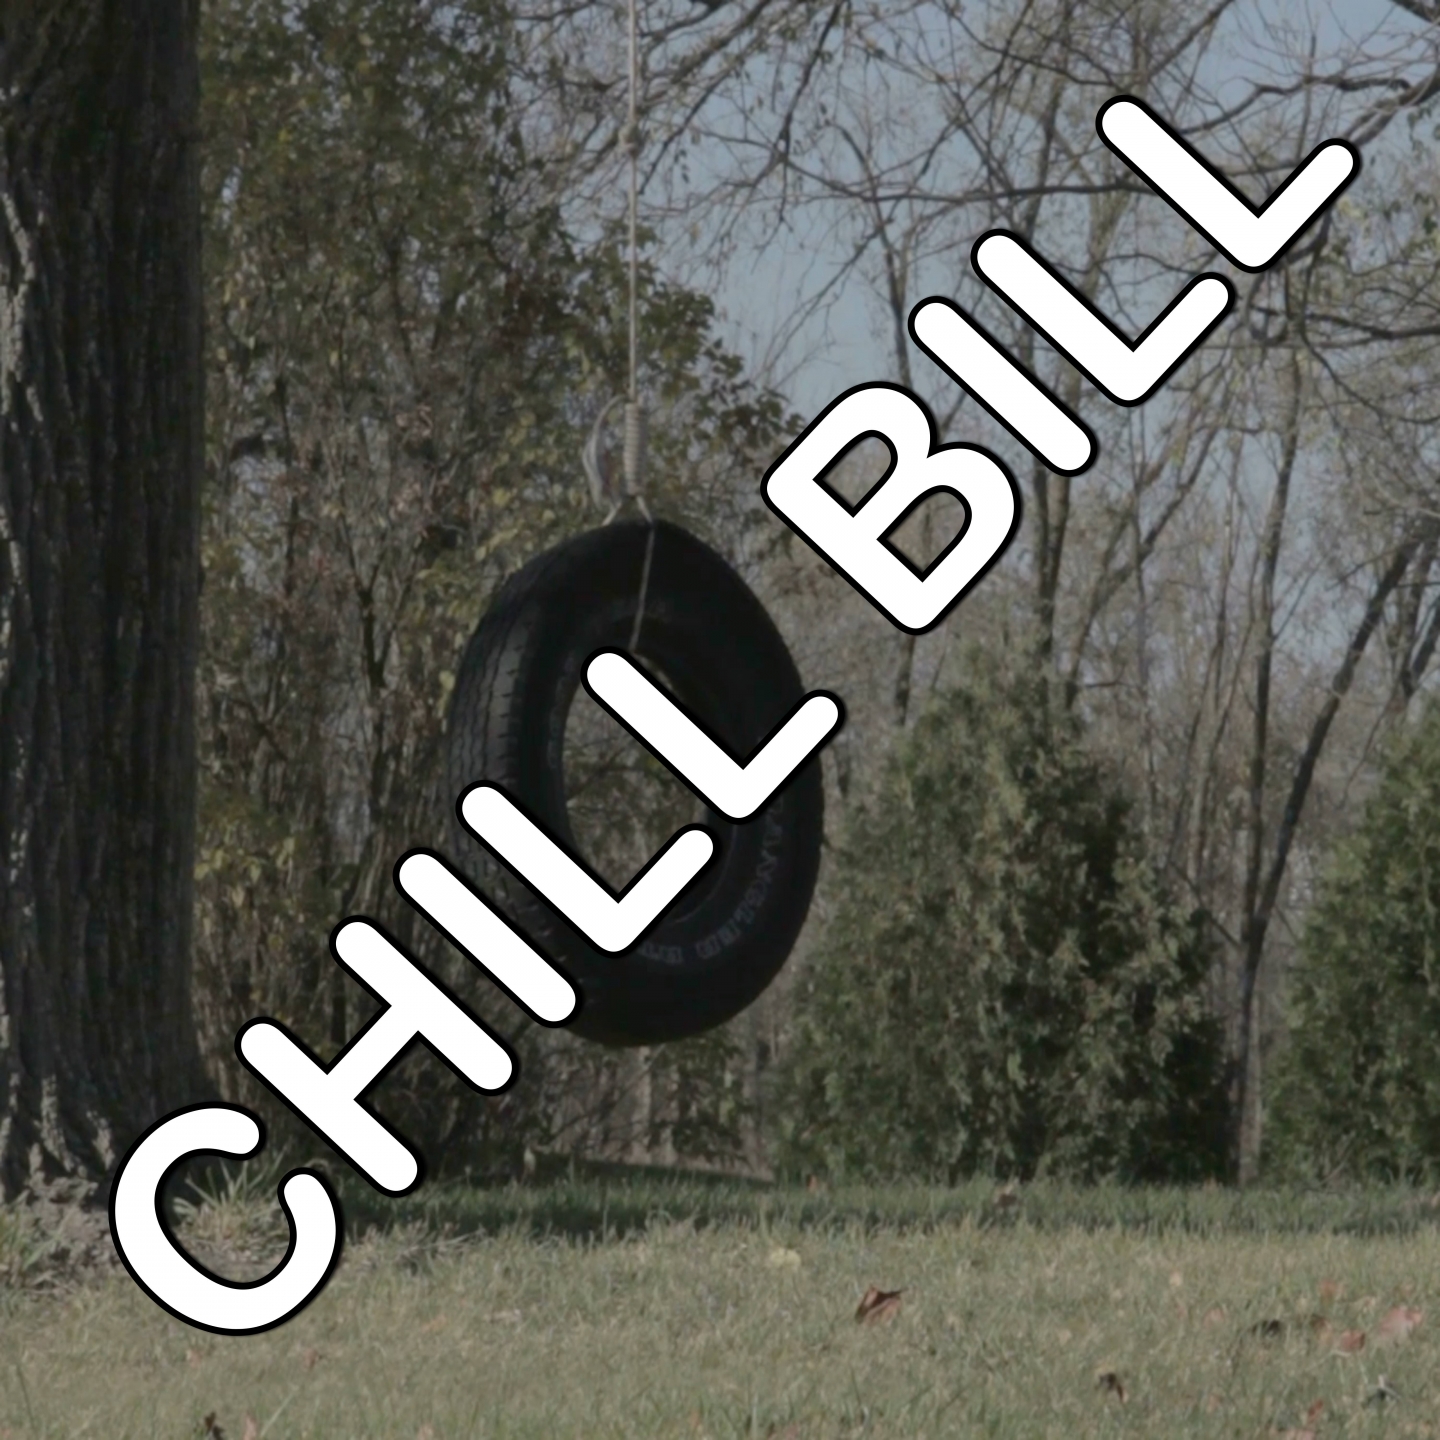 Chill Bill - Tribute to Rob and J. Davis and Spooks